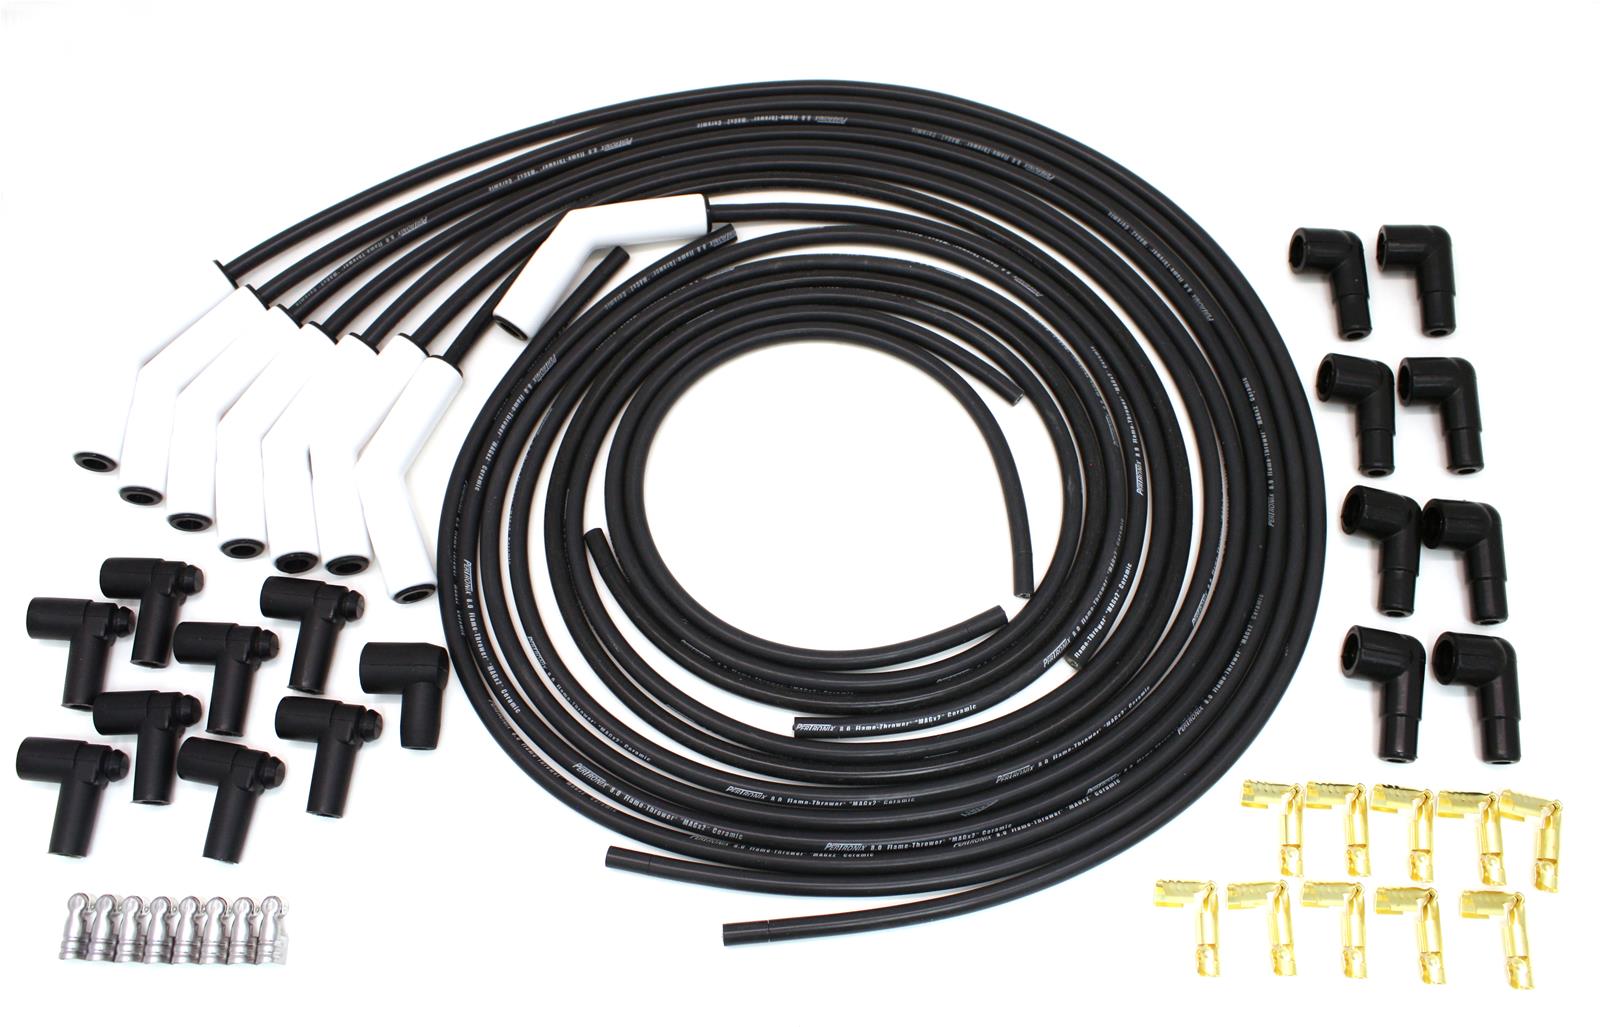 PerTronix Spark Plug Wire Set Flame-Thrower MAGX2 8MM Black With 90-Degree  White Ceramic Boots V8